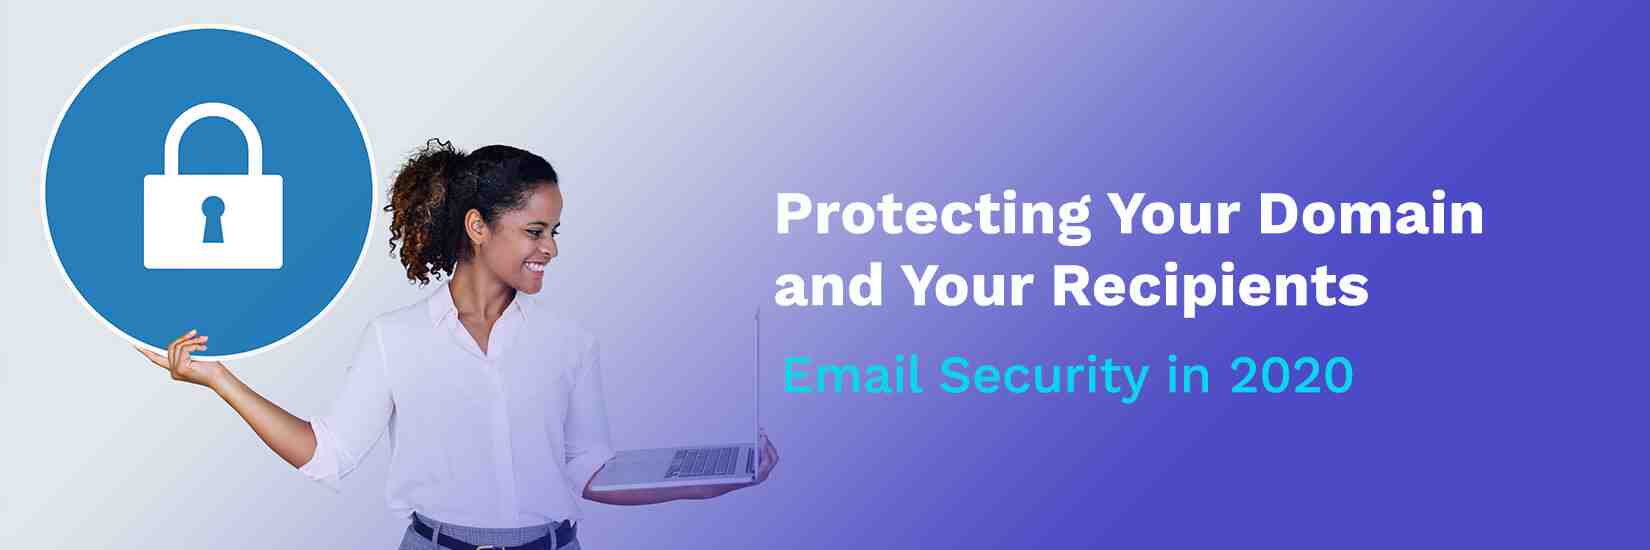 Email Security in 2020: Protecting Your Domain & Your Recipients